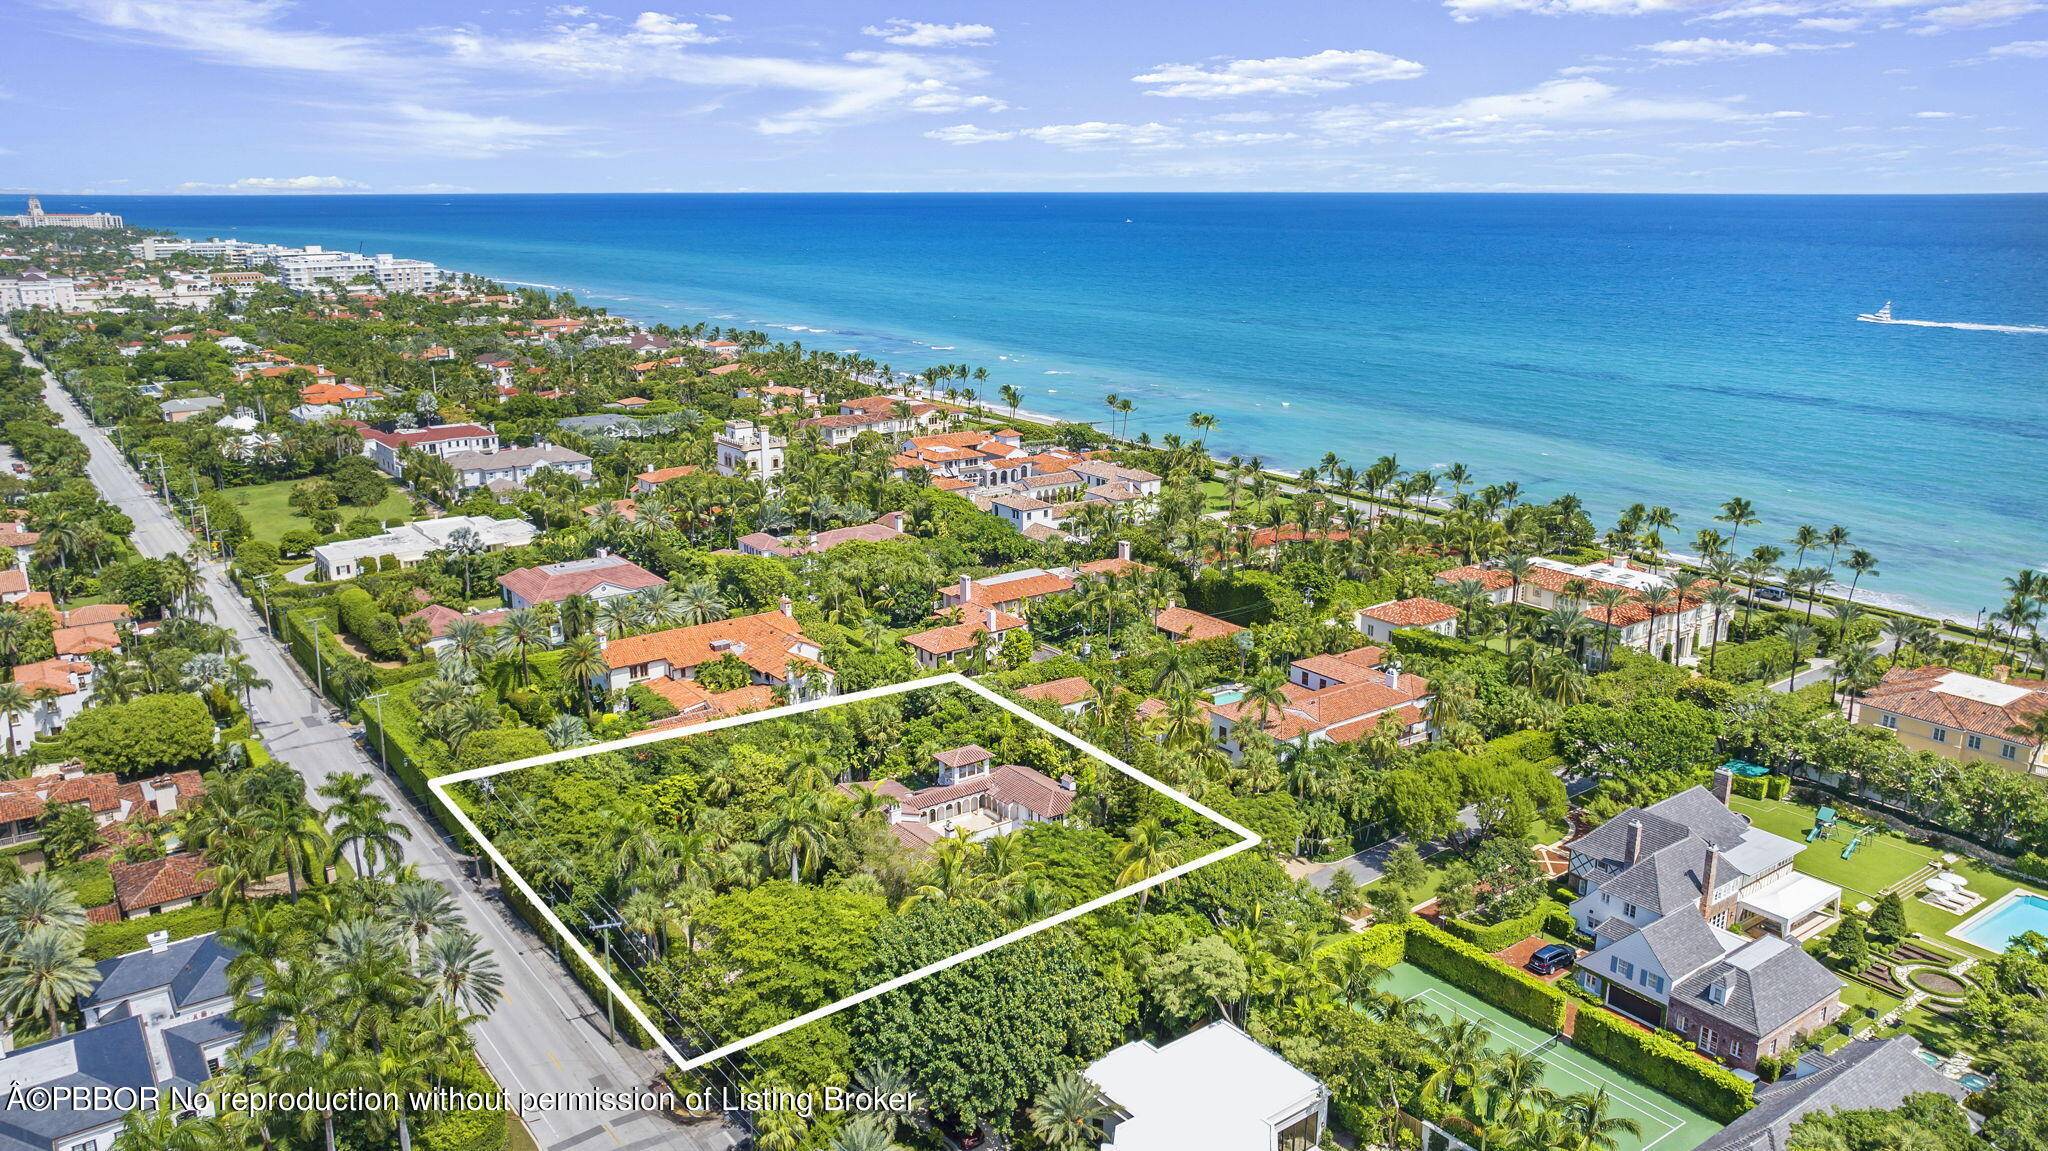 Introducing Villa Vera Maria Located on the ocean block, just 400' from your private beach.